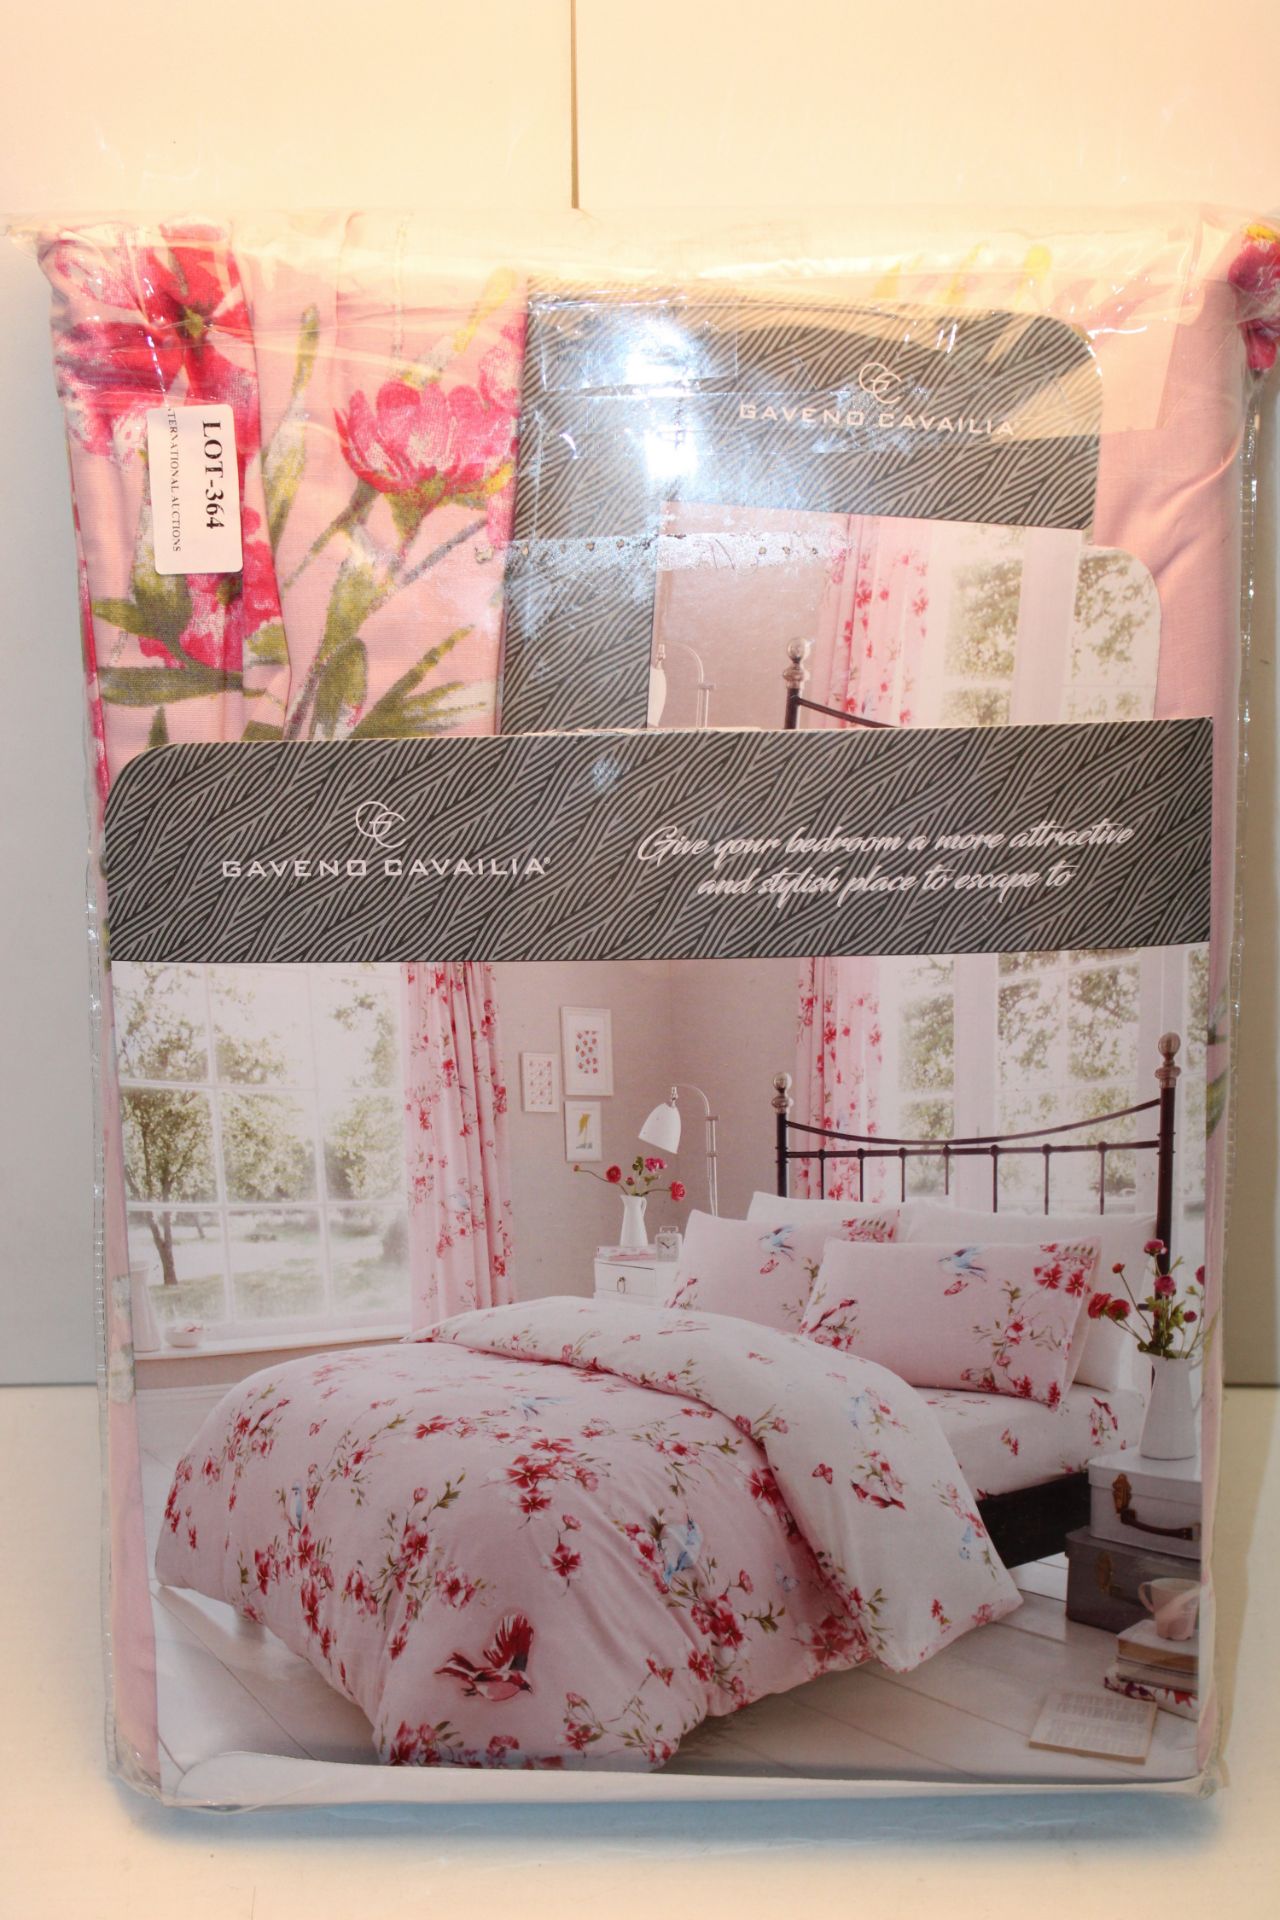 GAVENO CAVAILA PATTERNED DOUBLE DUVET COVER SET Condition ReportAppraisal Available on Request-